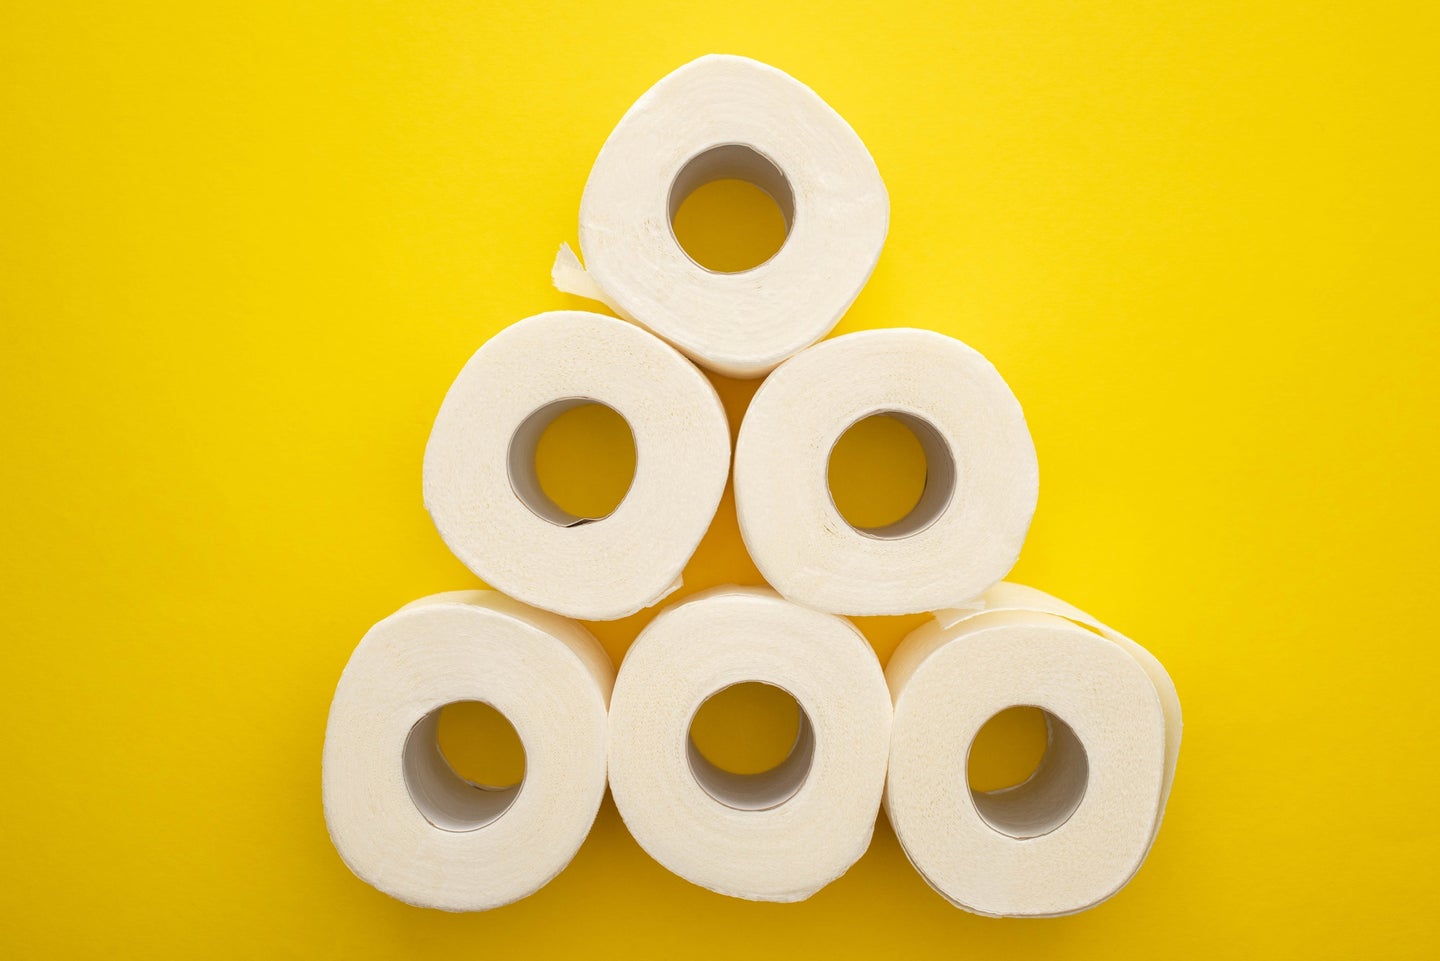 Toilet paper rolls on a yellow background to represent IBS causes